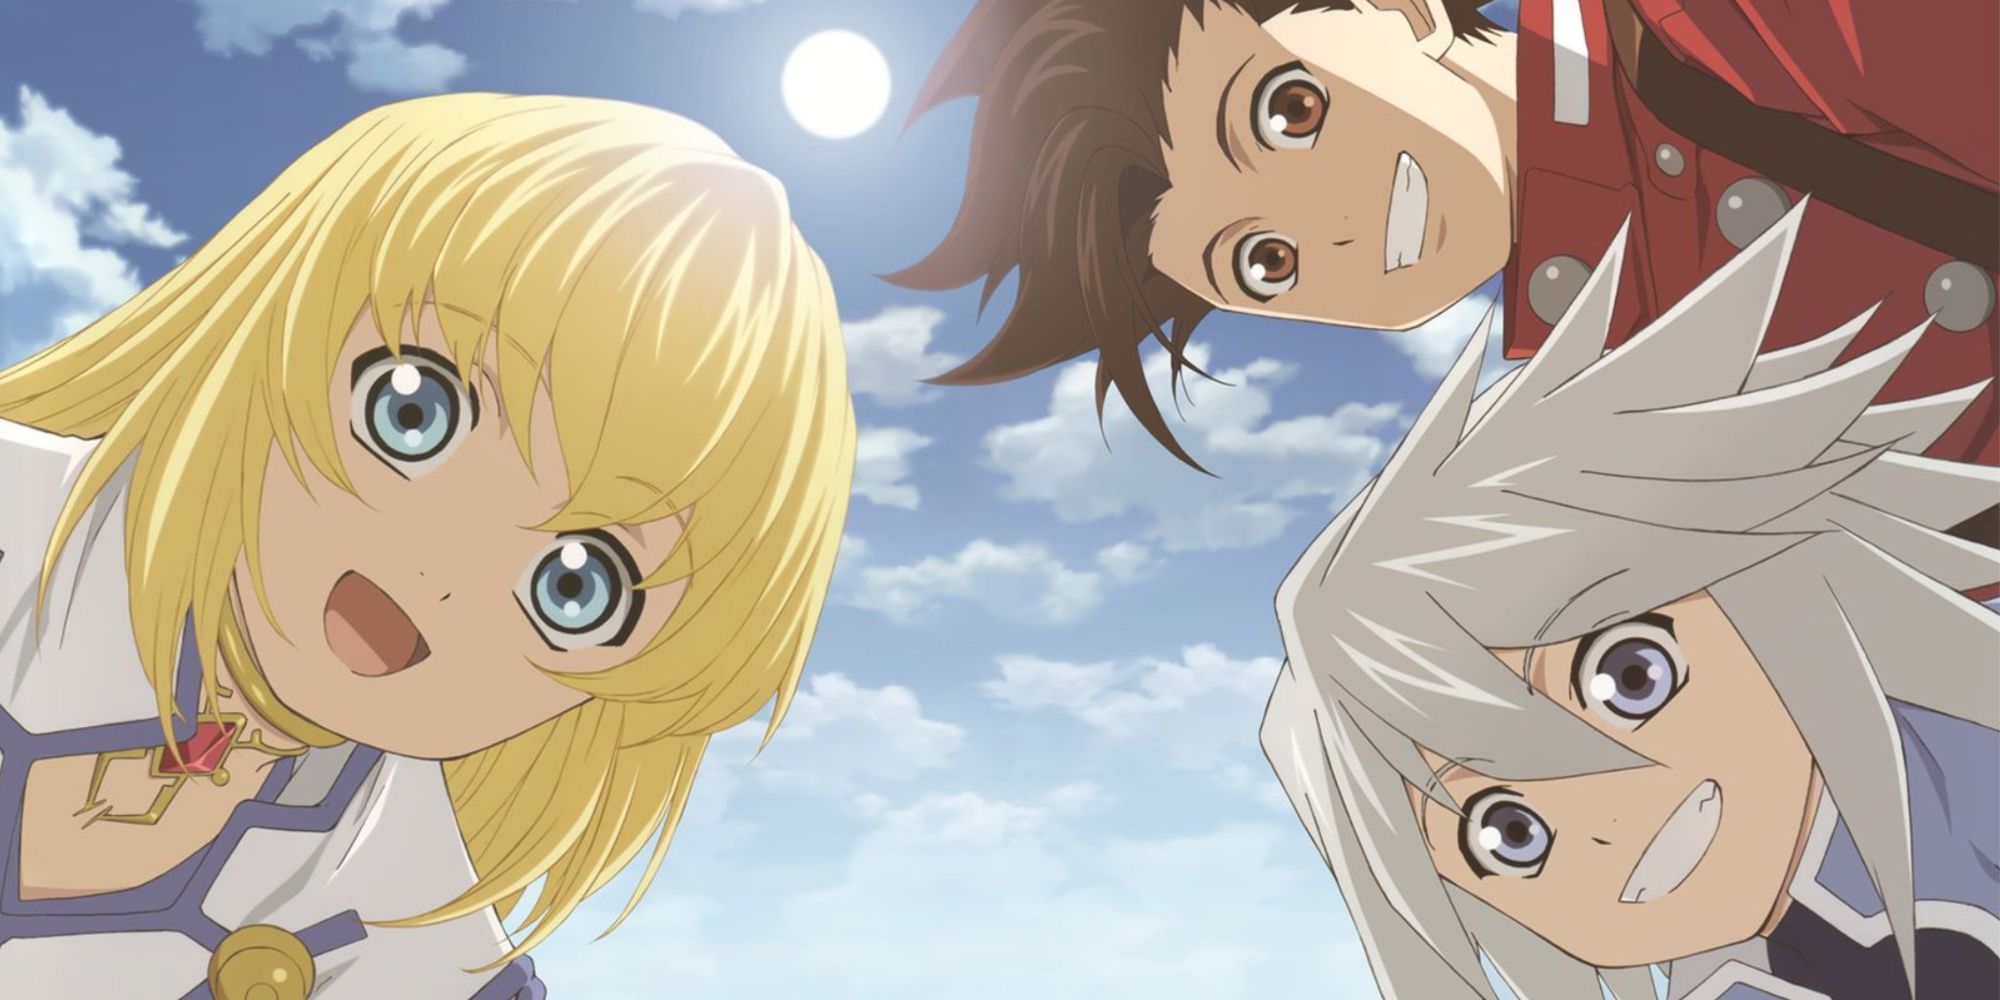 An image showing Colette (Blonde Hair), Genis (White Hair), and Lloyd (Brown Hair) from Tales of Symphonia Remastered leaning over the camera and smiling.